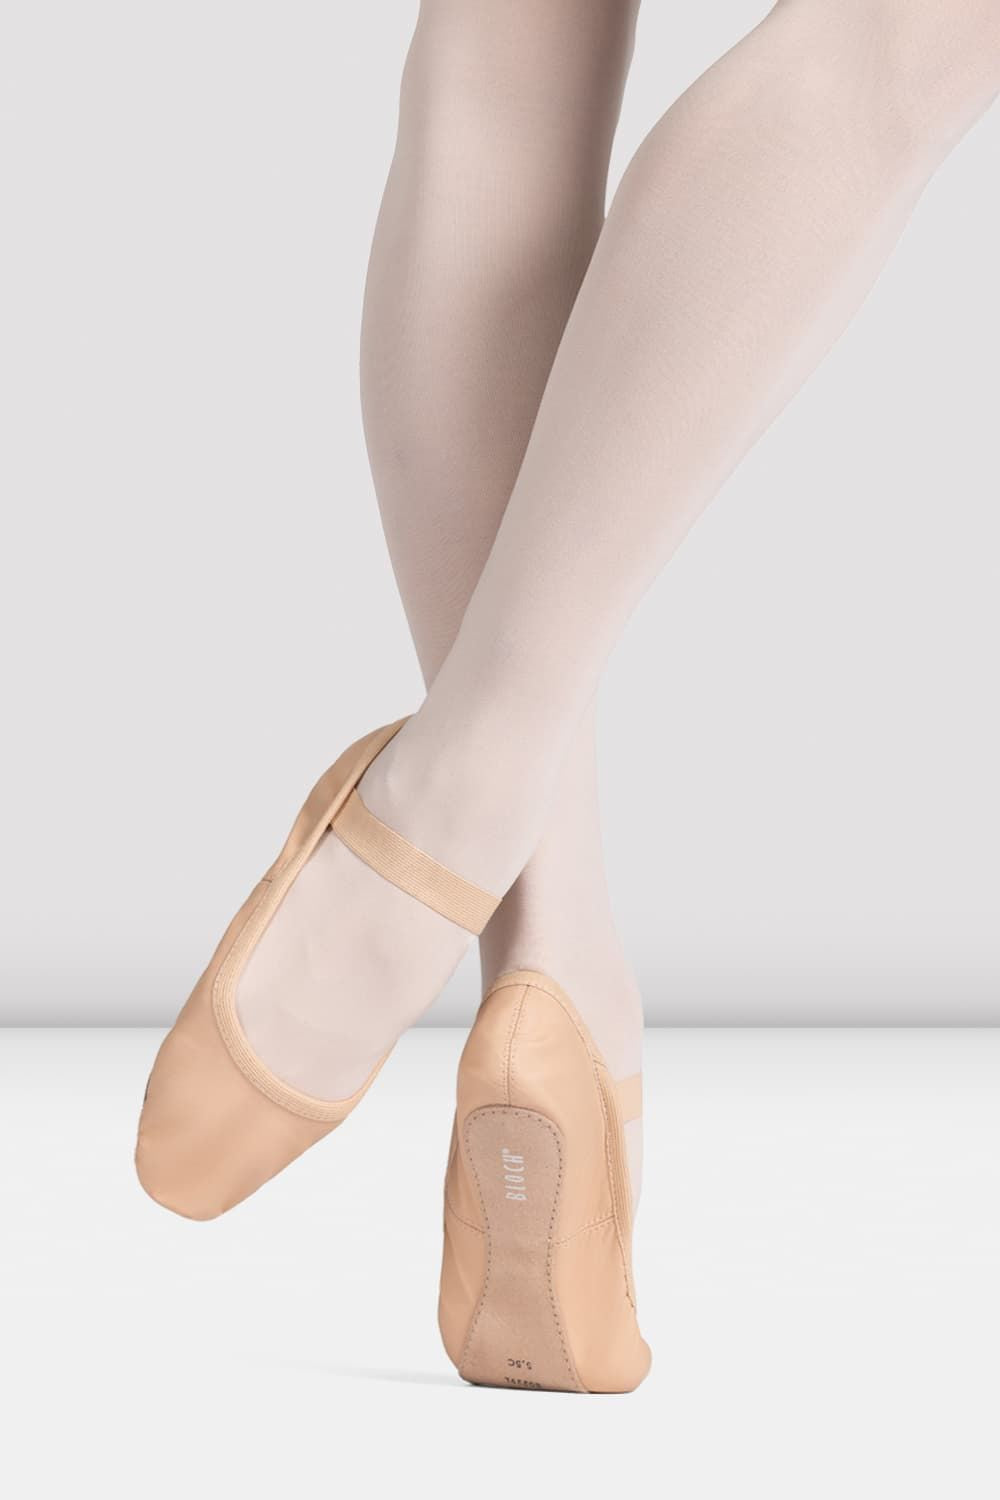 BLOCH Ladies Arise II Leather Ballet Shoes, Pink Leather